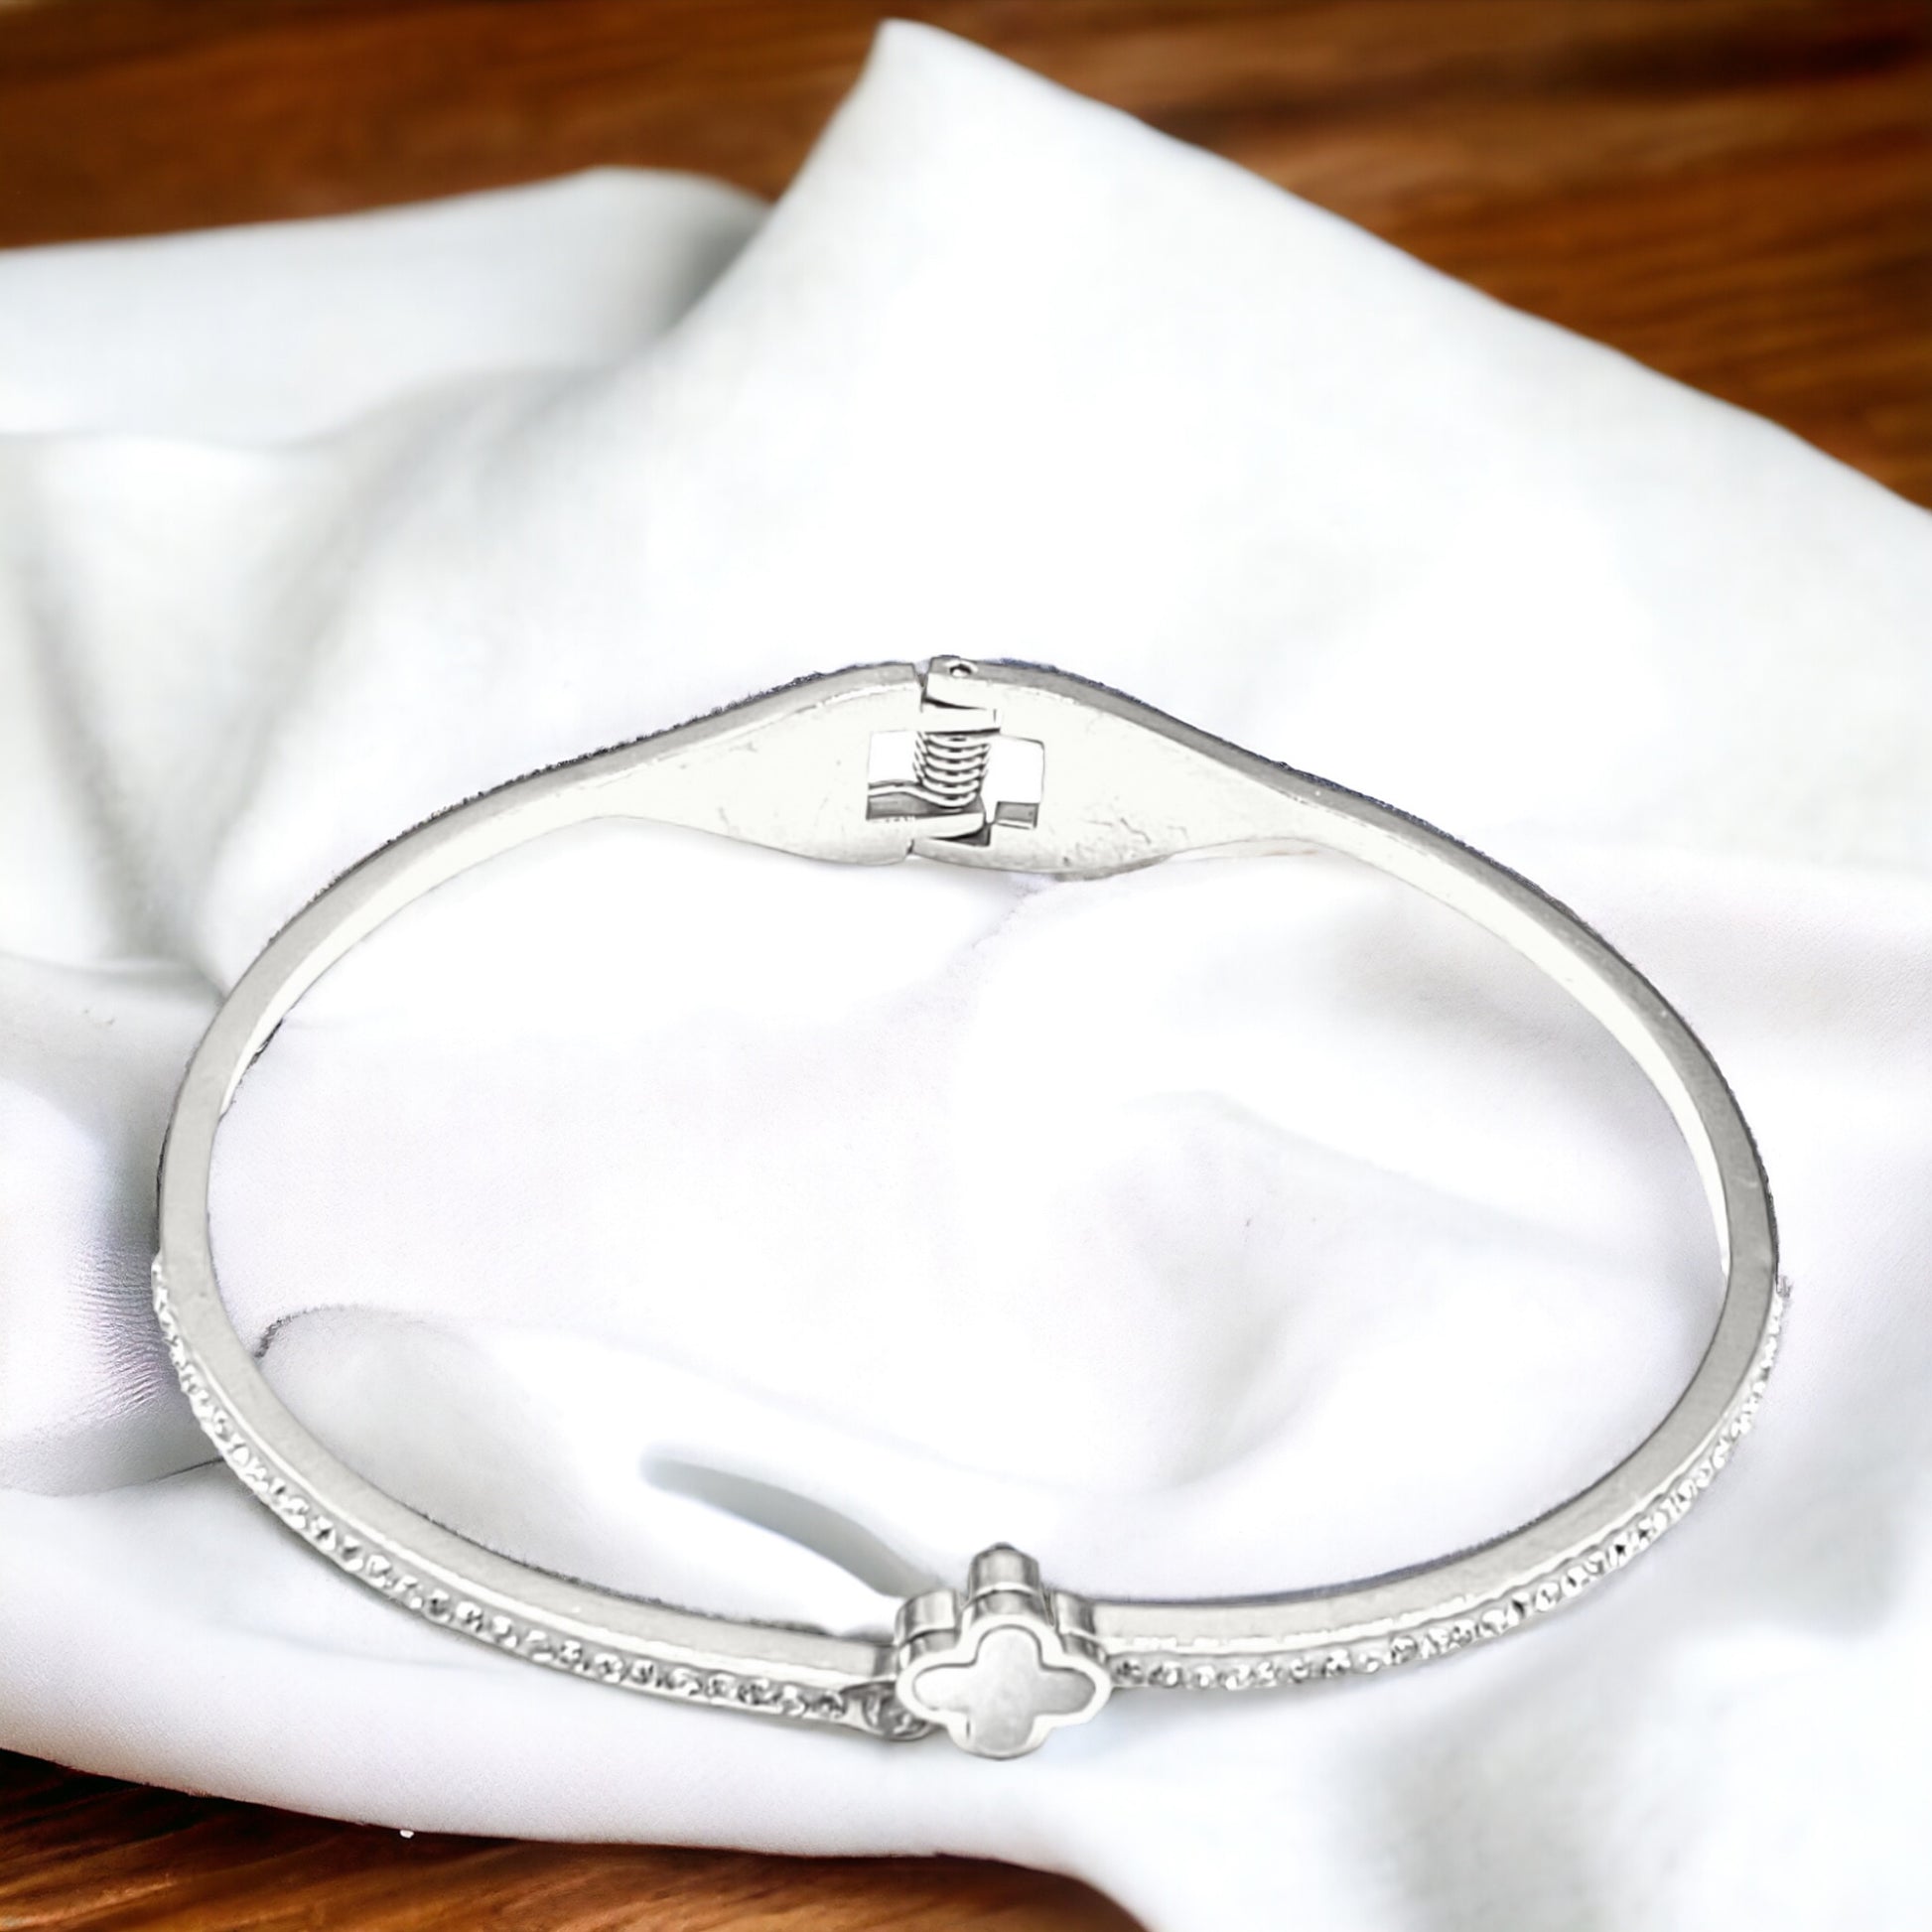 Silver Stainless Steel Bangle - Marisa's Shopping Network 